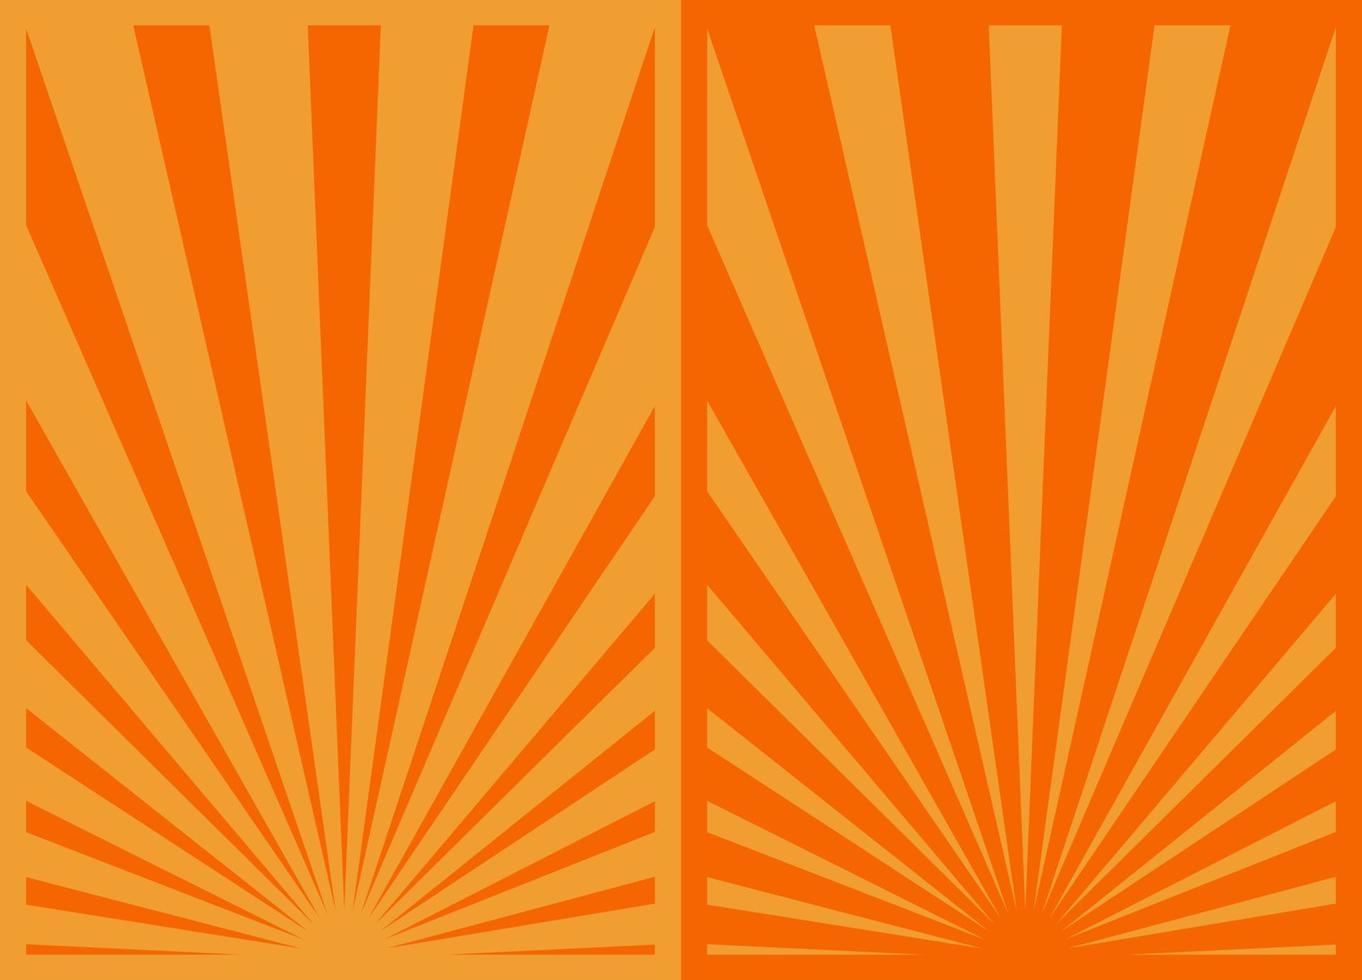 Vintage Orange Sunburst Stripes Poster Set, Template With Rays Centered at the Bottom, Retro Inspired Cartoon Vertical Posters. vector